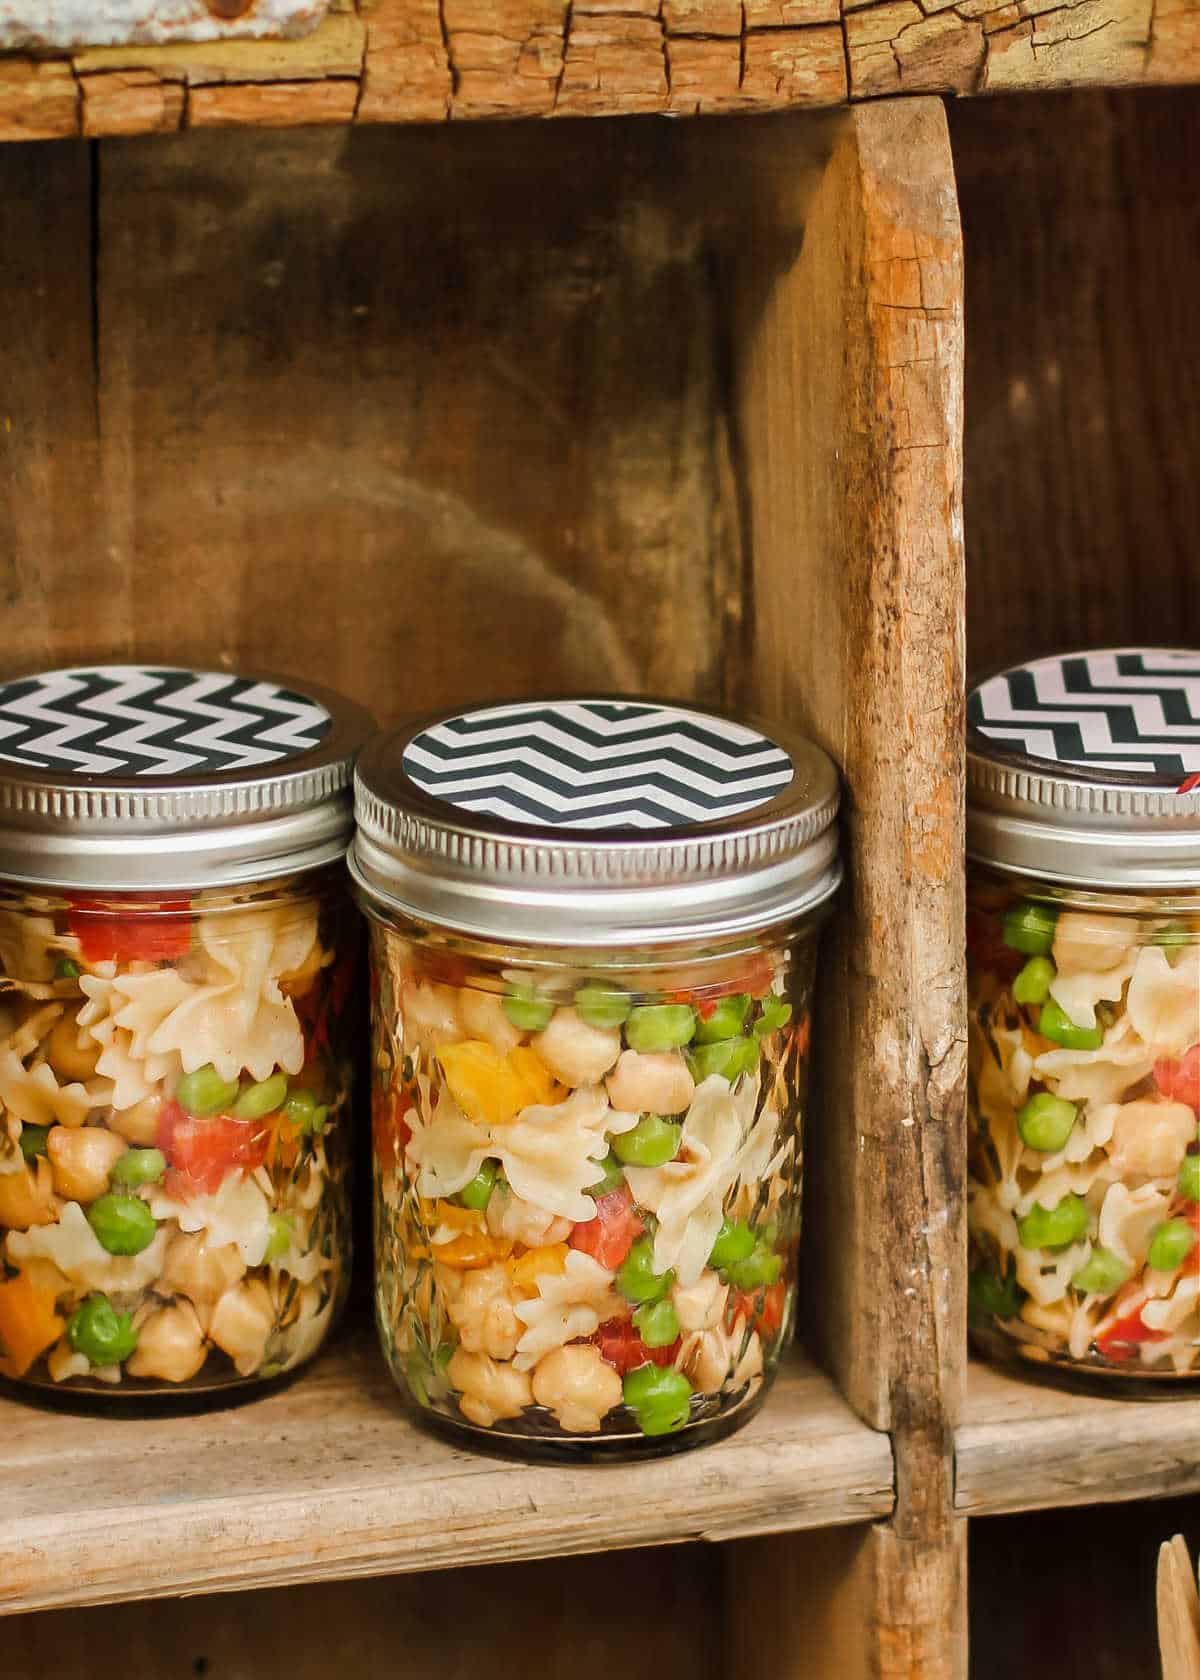 mason jars filled with pasta salad sitting in wood crate.